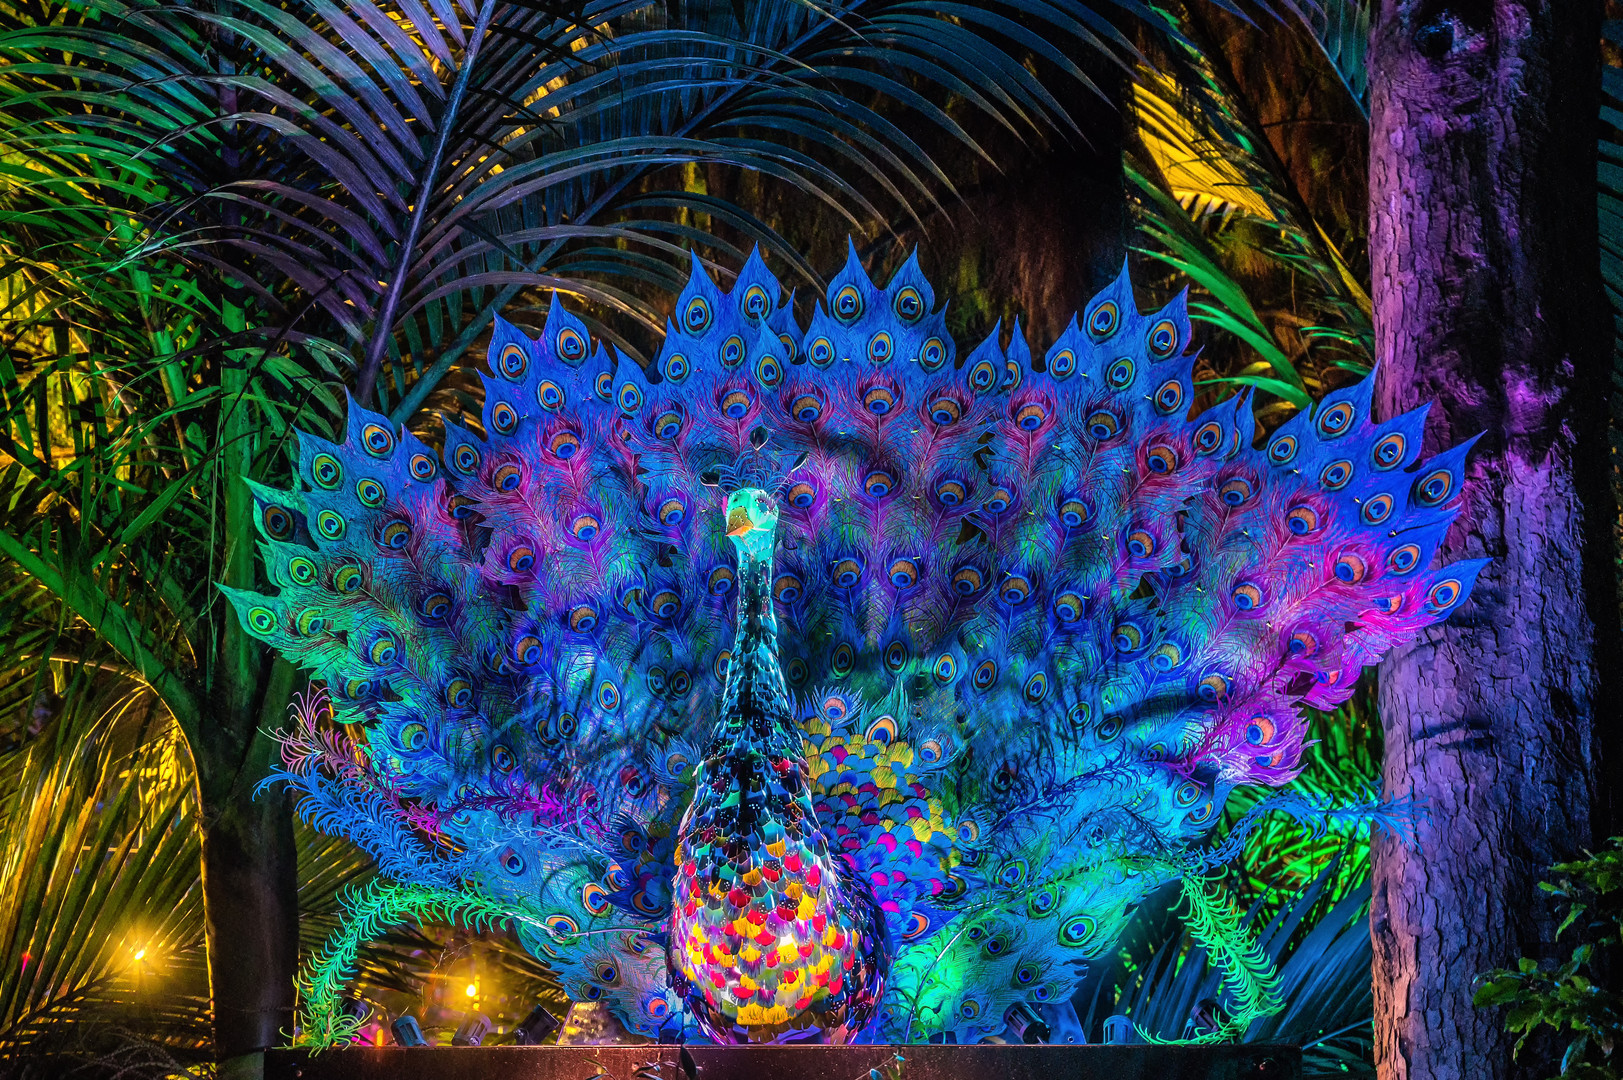 Festival of Lights - "Regal Peacock" (2), New Plymouth, New Zealand